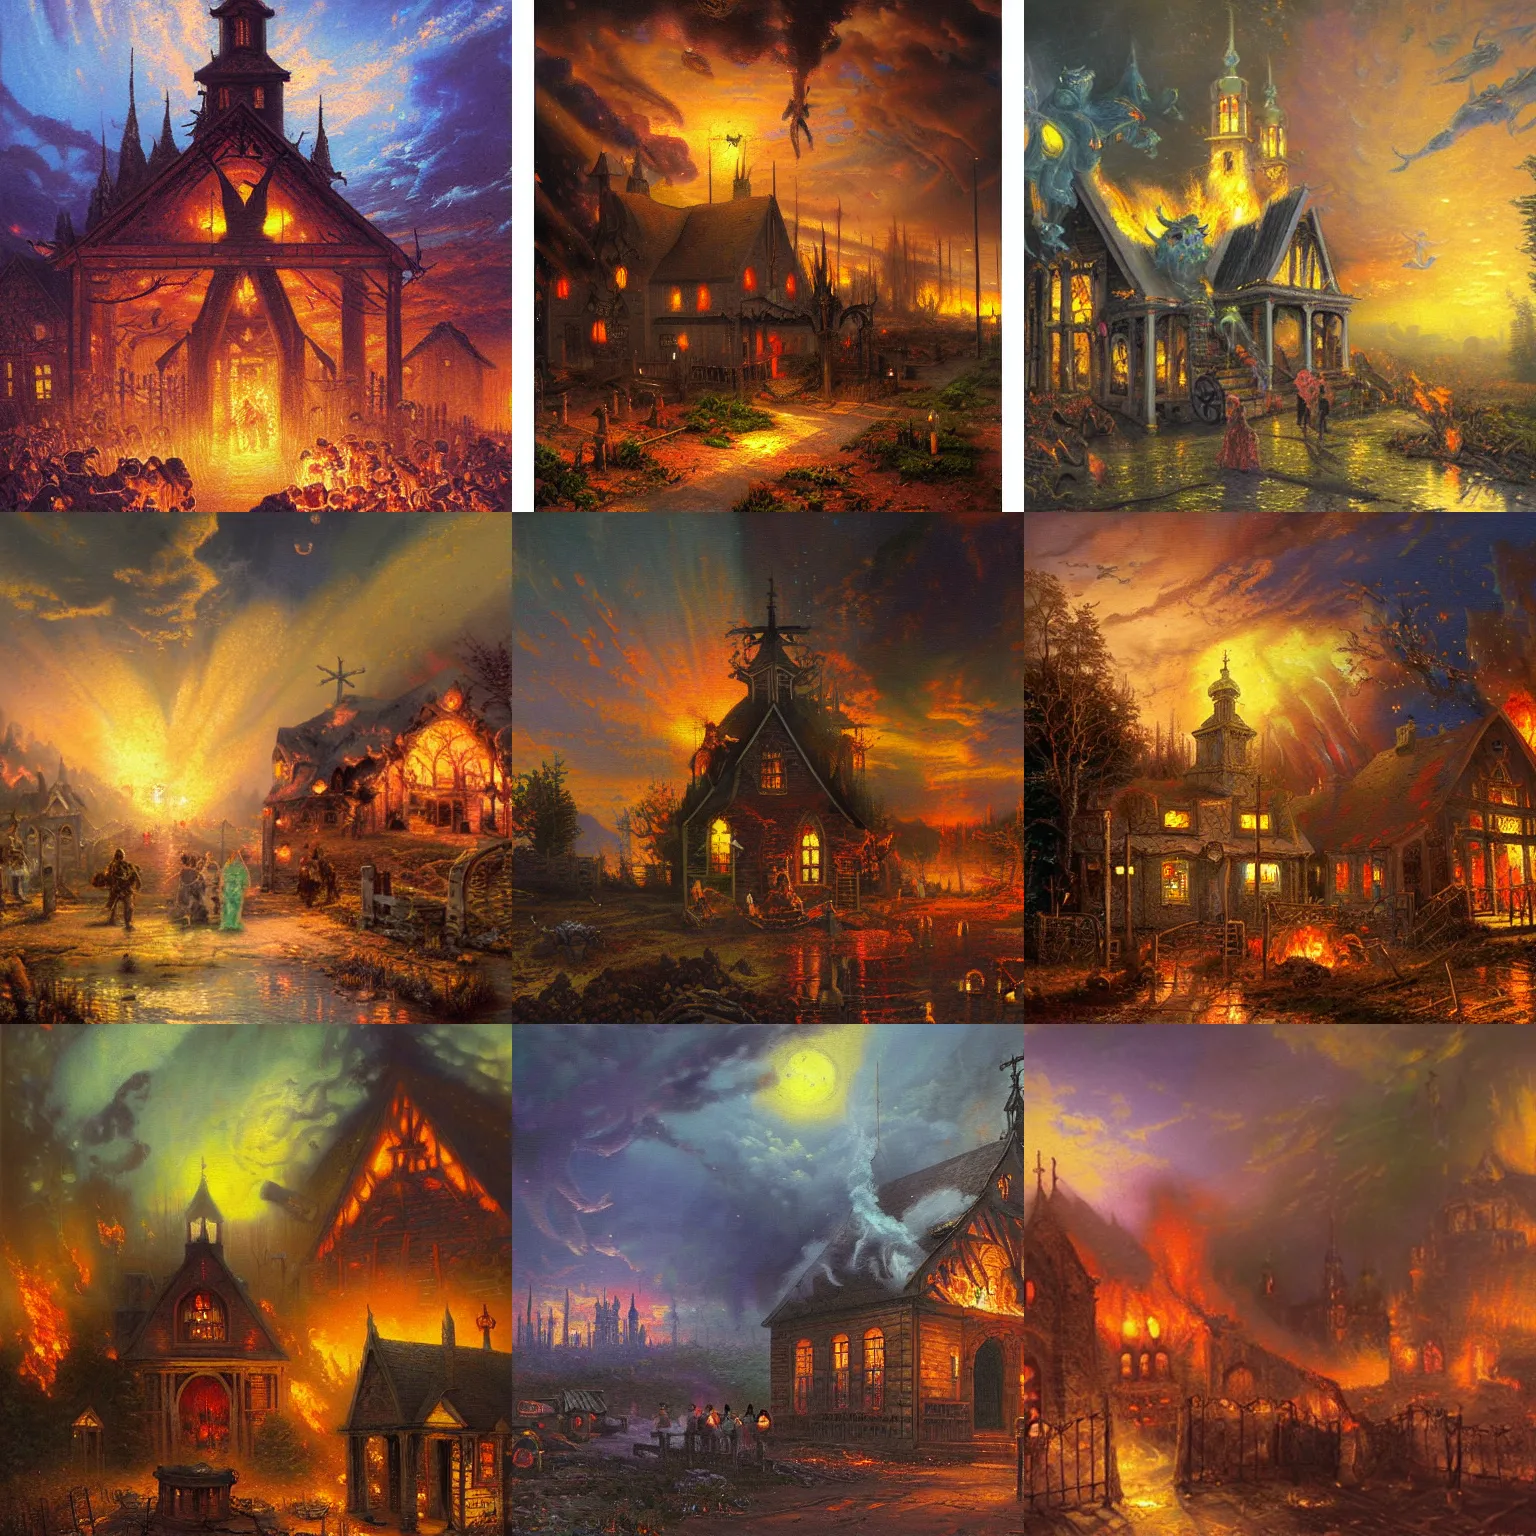 Prompt: A painting of a burning apocalyptic country chapel at night surrounded by demons from hell by Thomas Kinkade